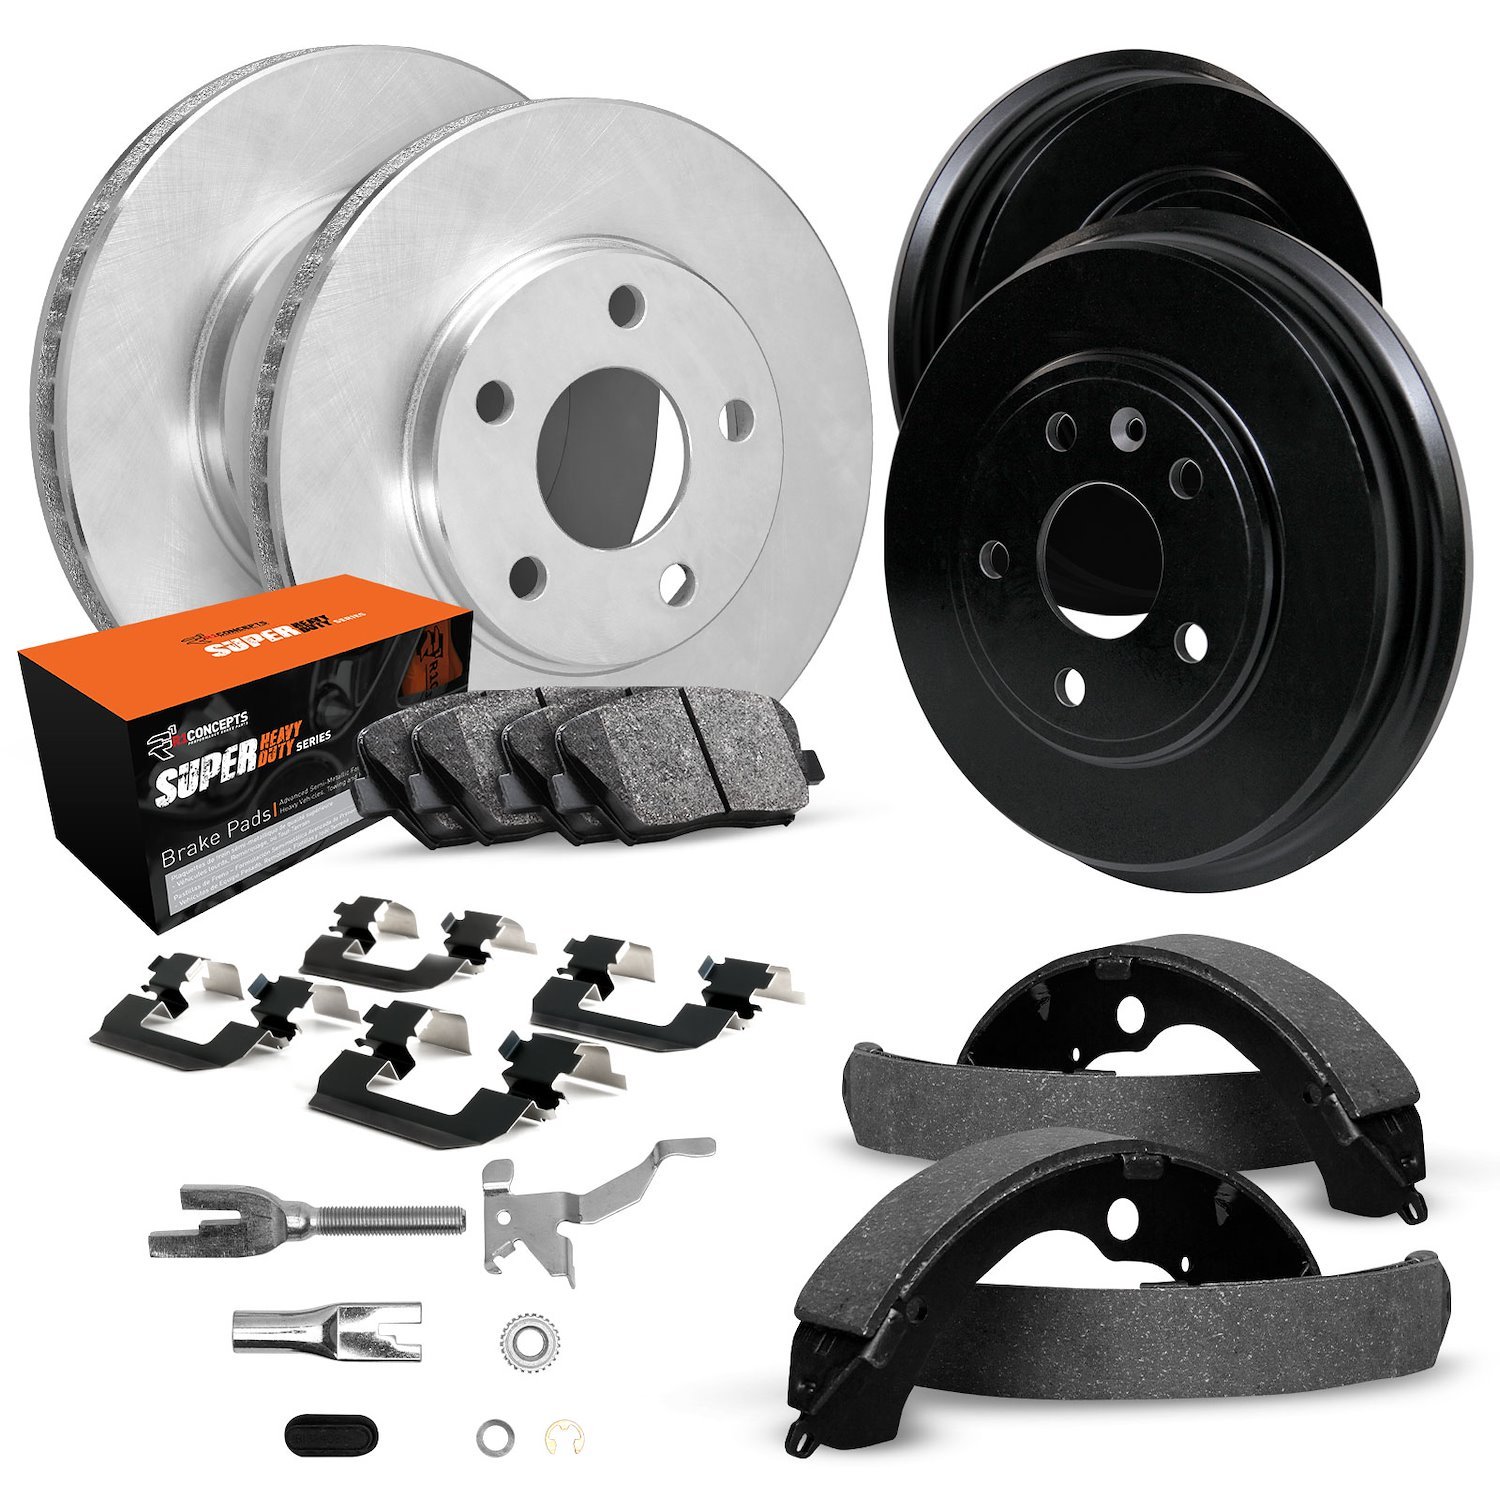 E-Line Blank Brake Rotor & Drum Set w/Super-Duty Pads, Shoes, Hardware, & Adjusters, 1970-1975 GM, Position: Front & Rear